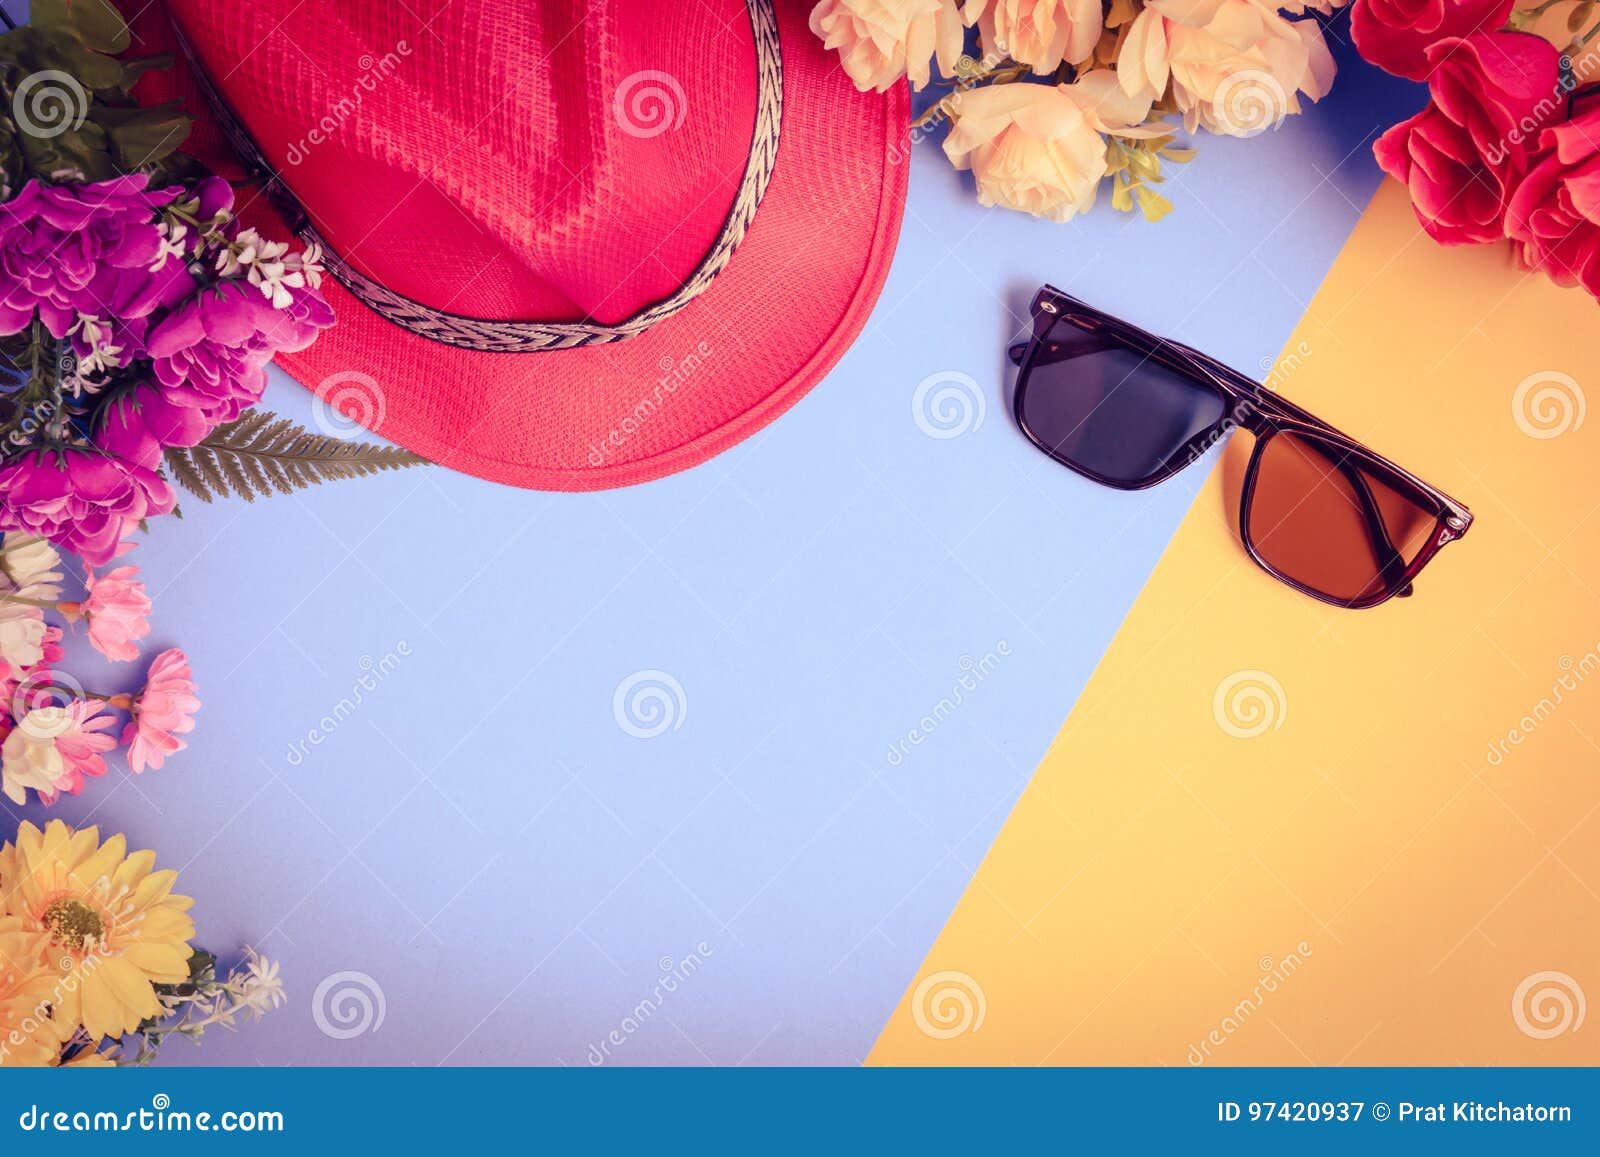 Flat Lay Hat and Sunglasses with Flowers on Top Table Stock Image ...